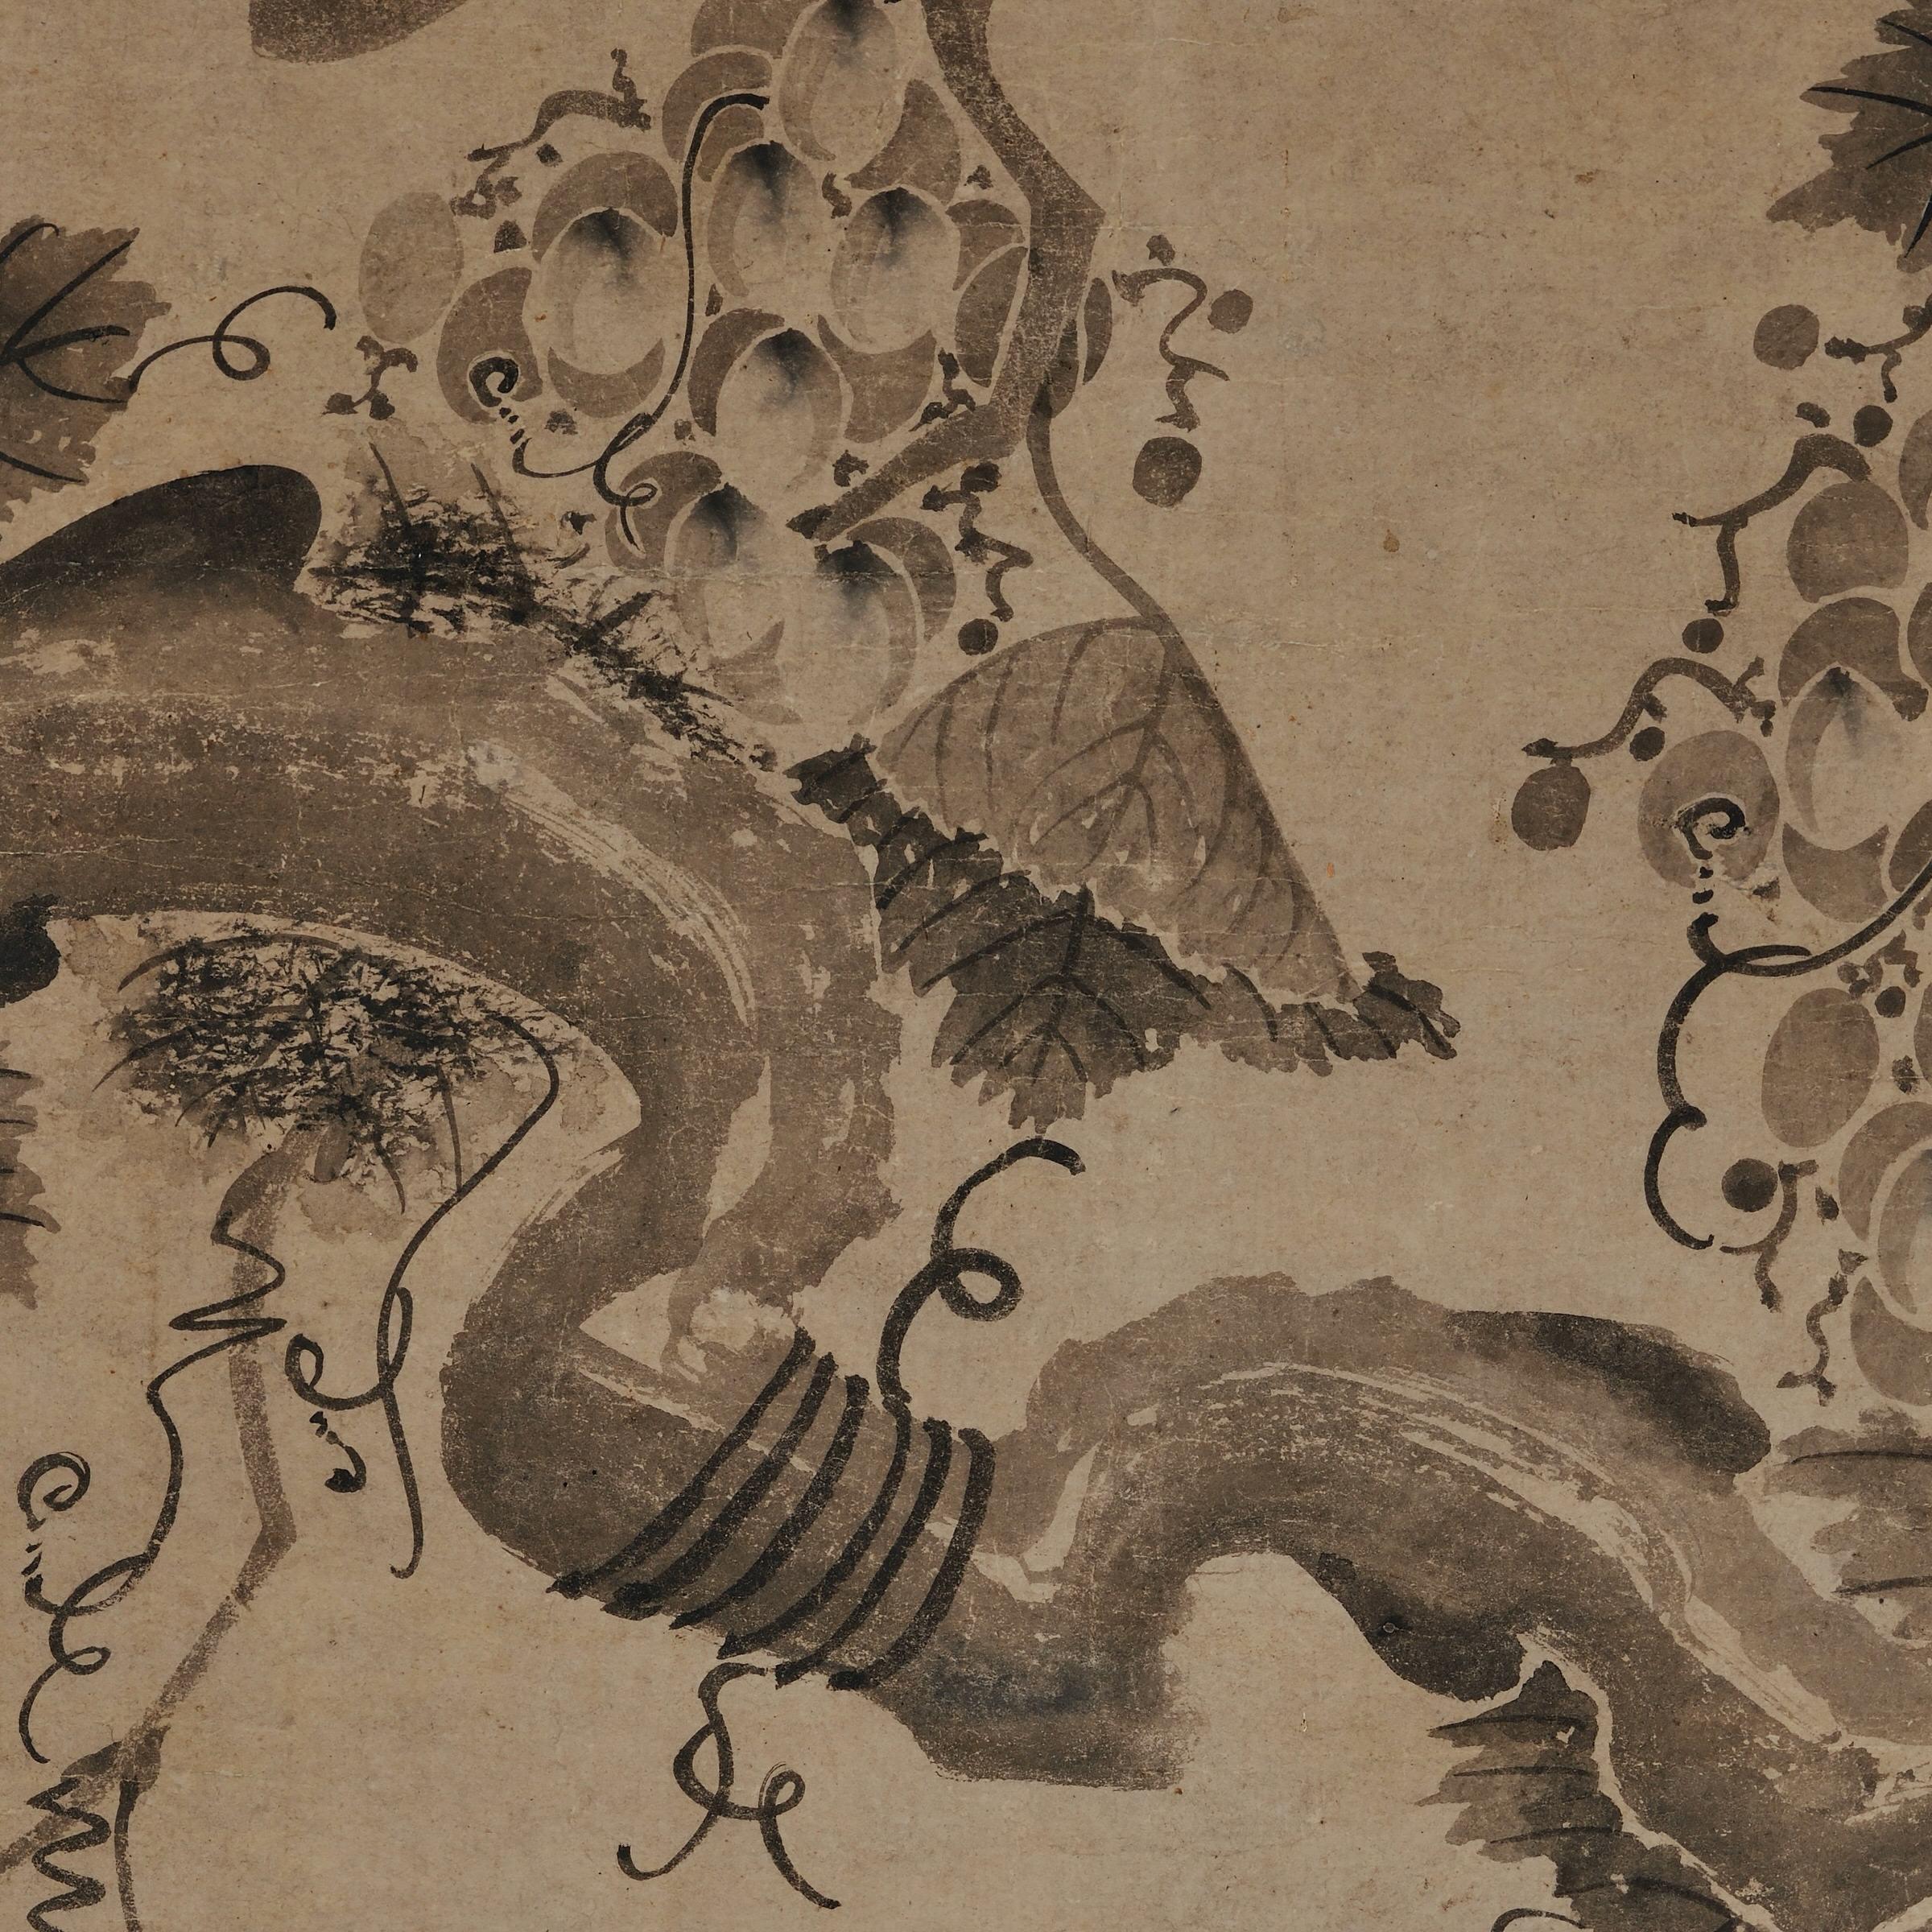 Hand-Painted 17th Century Korean Grapevine and Squirrel Scroll Painting, Mid Joseon Period For Sale